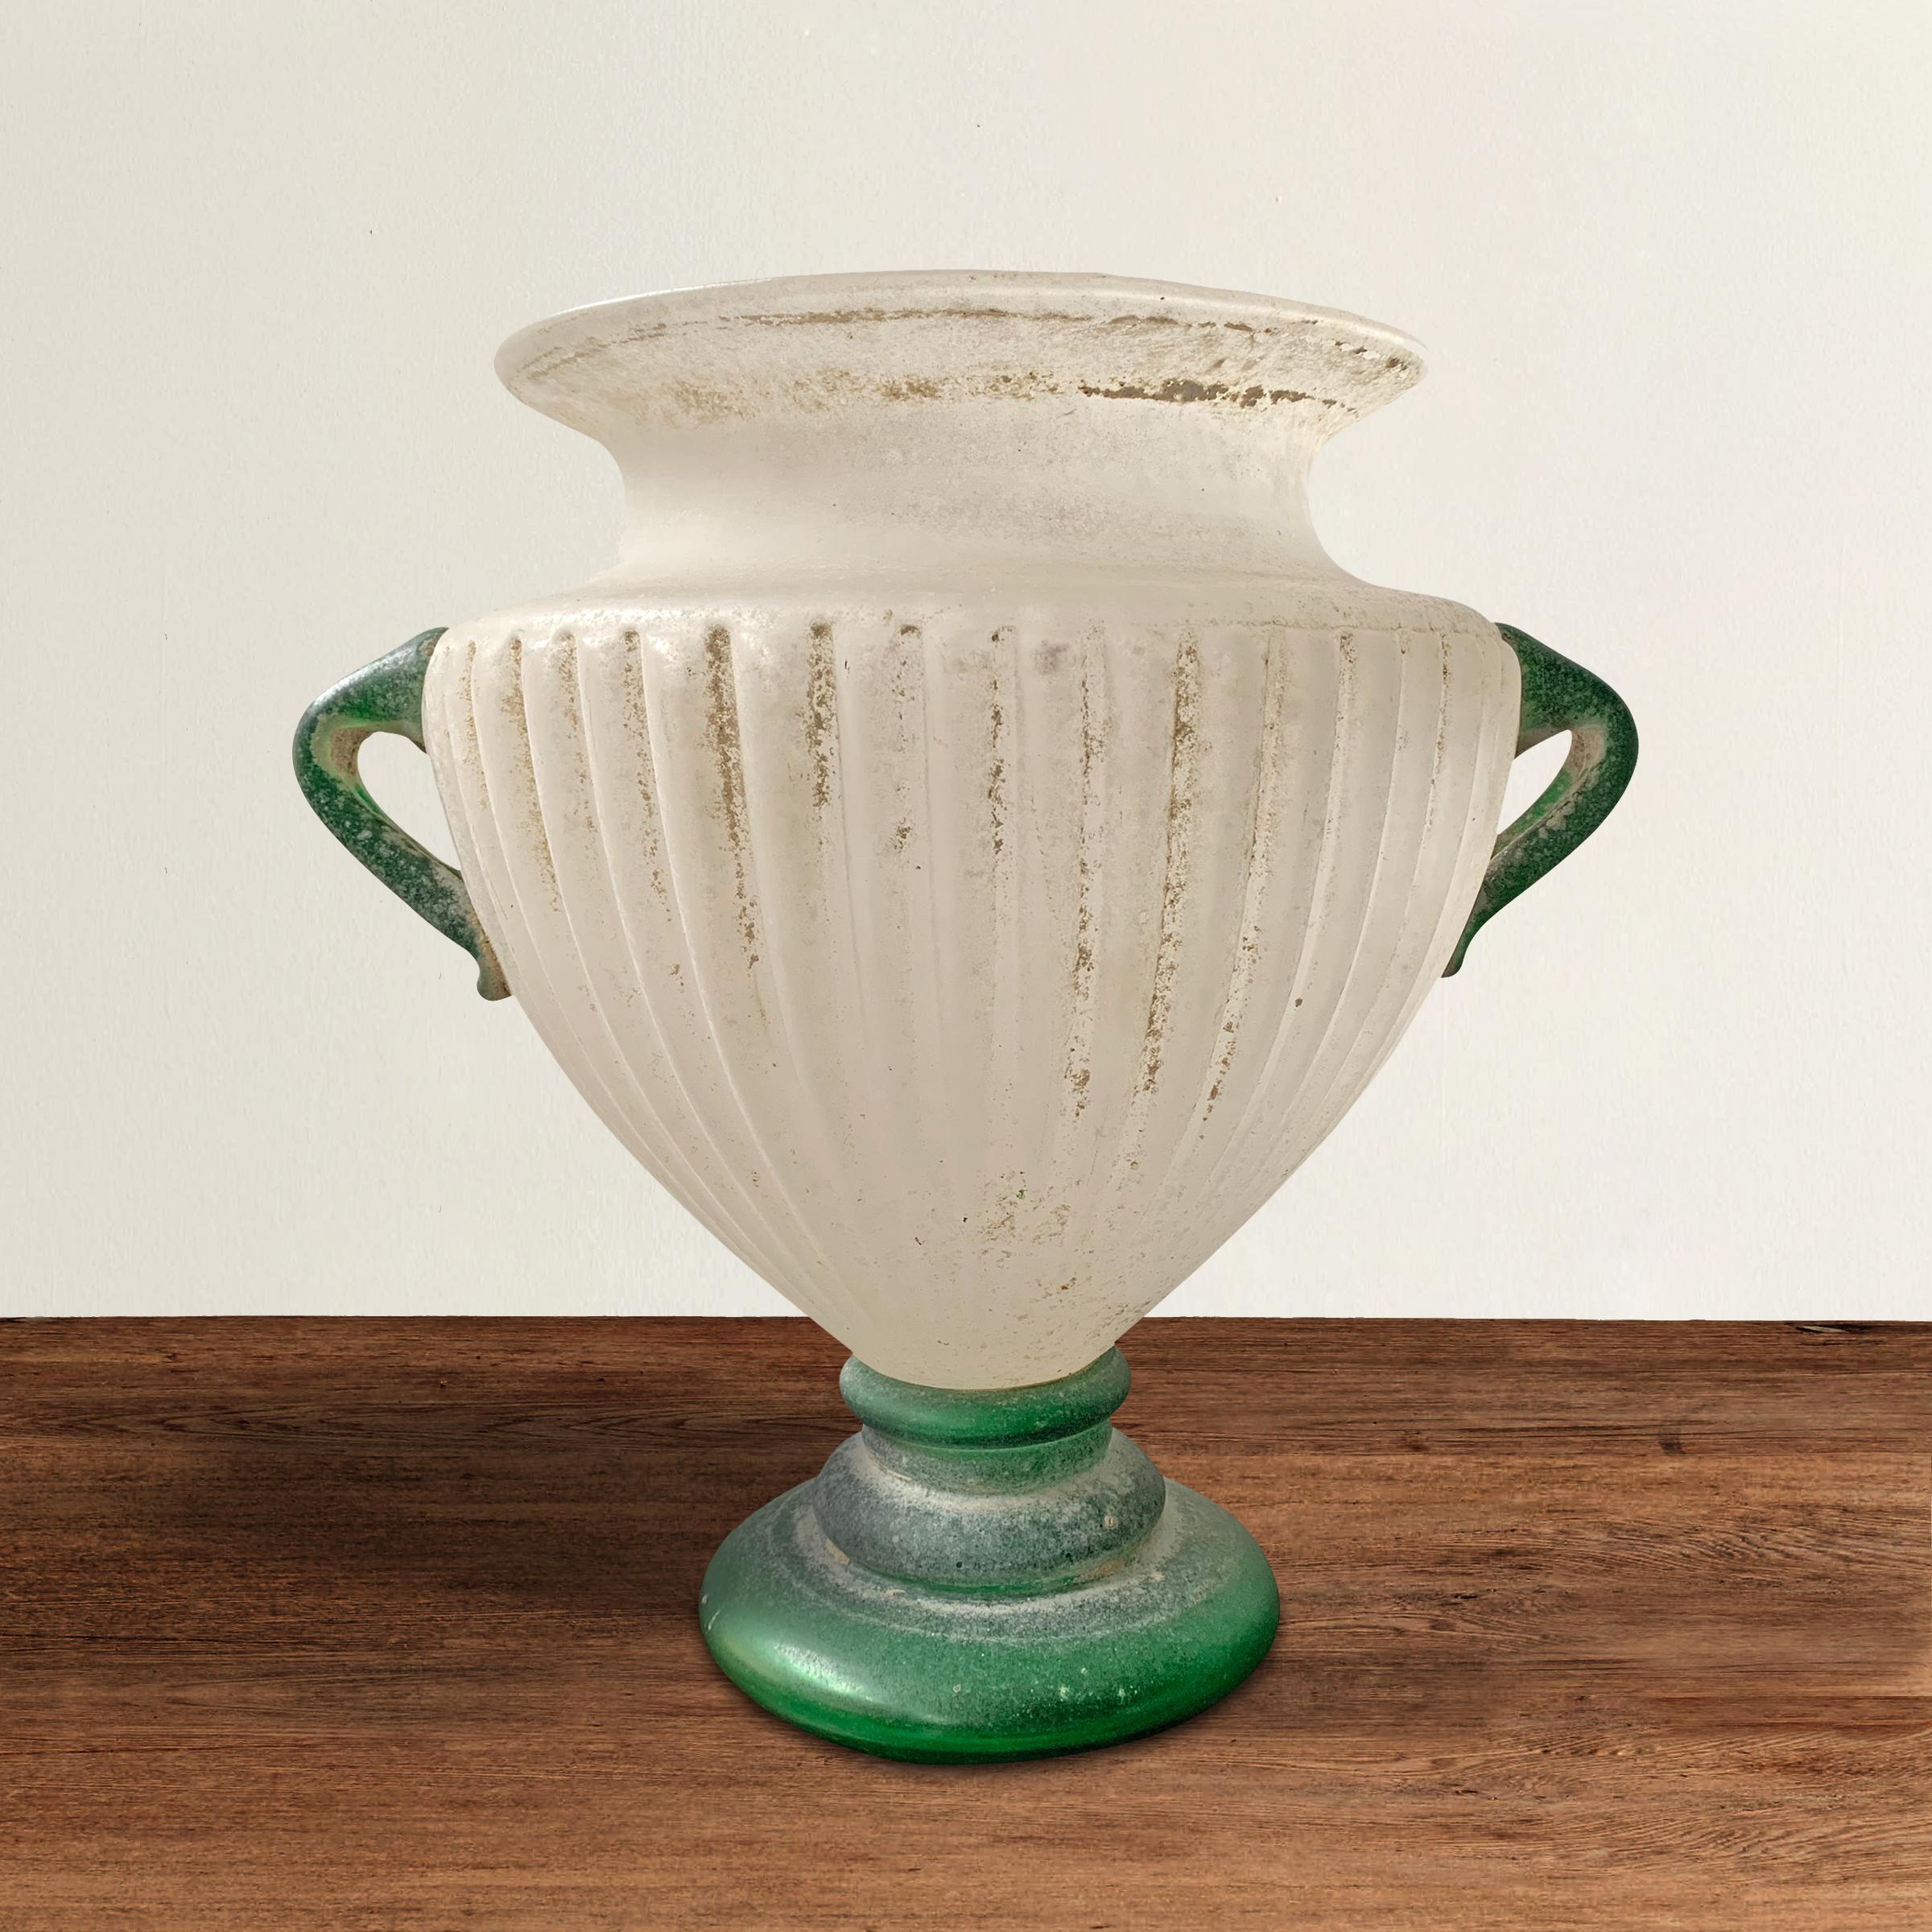 A Grande mid-20th century Italian Murano blown scavo glass vase of Classical Roman form with two green glass handles applied to an opaque white fluted vase resting a tiered green glass foot. Scavo is Italian for 